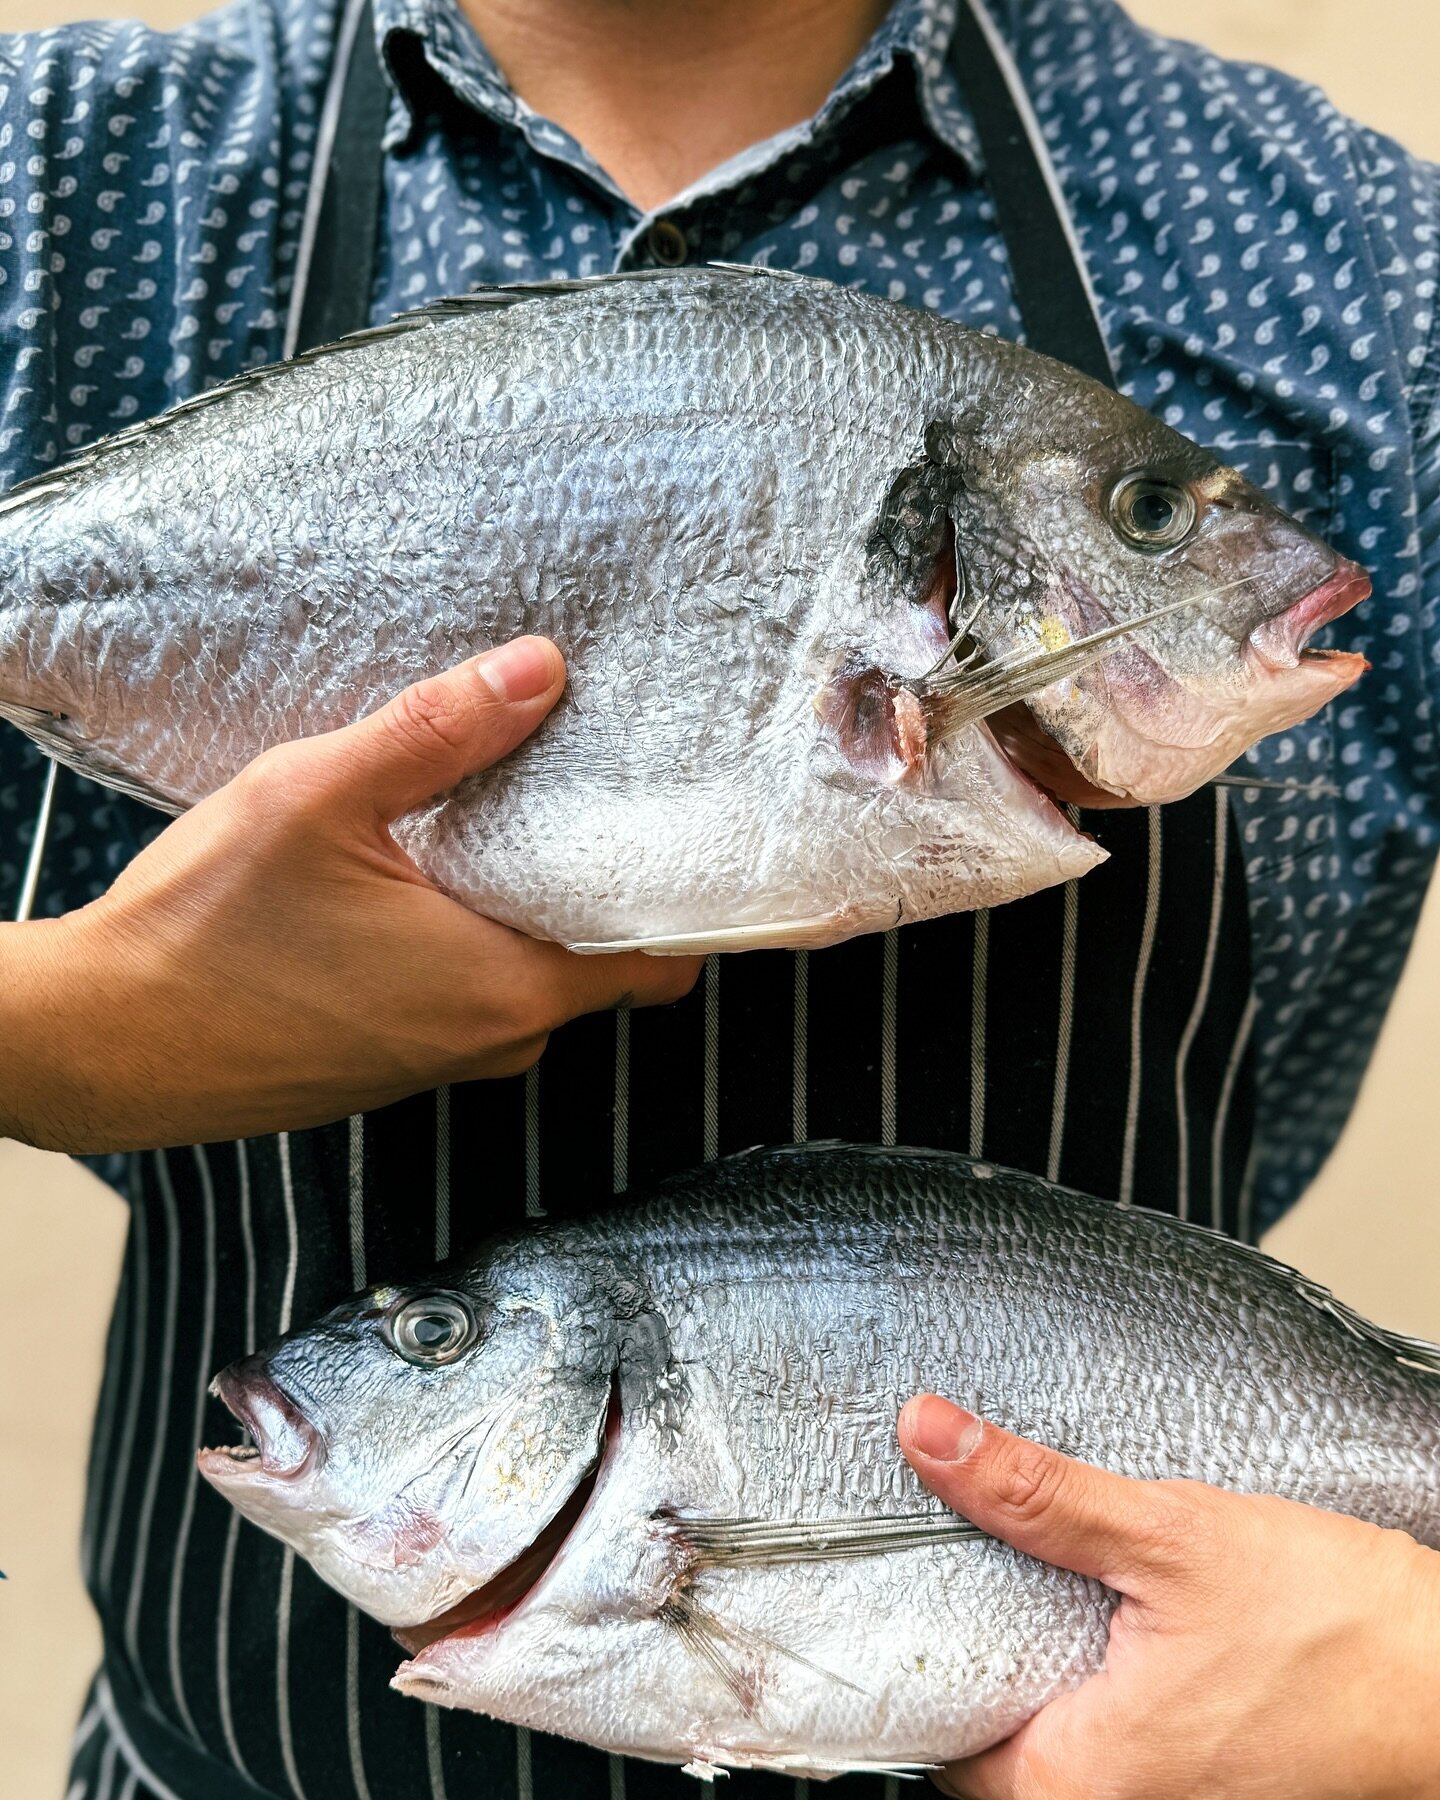 Dorade / Sea Bream - There&rsquo;s a good layer of fat between the skin and flesh of the dorade, making it a great fish for grilling, baking, and other skin-on cooking methods